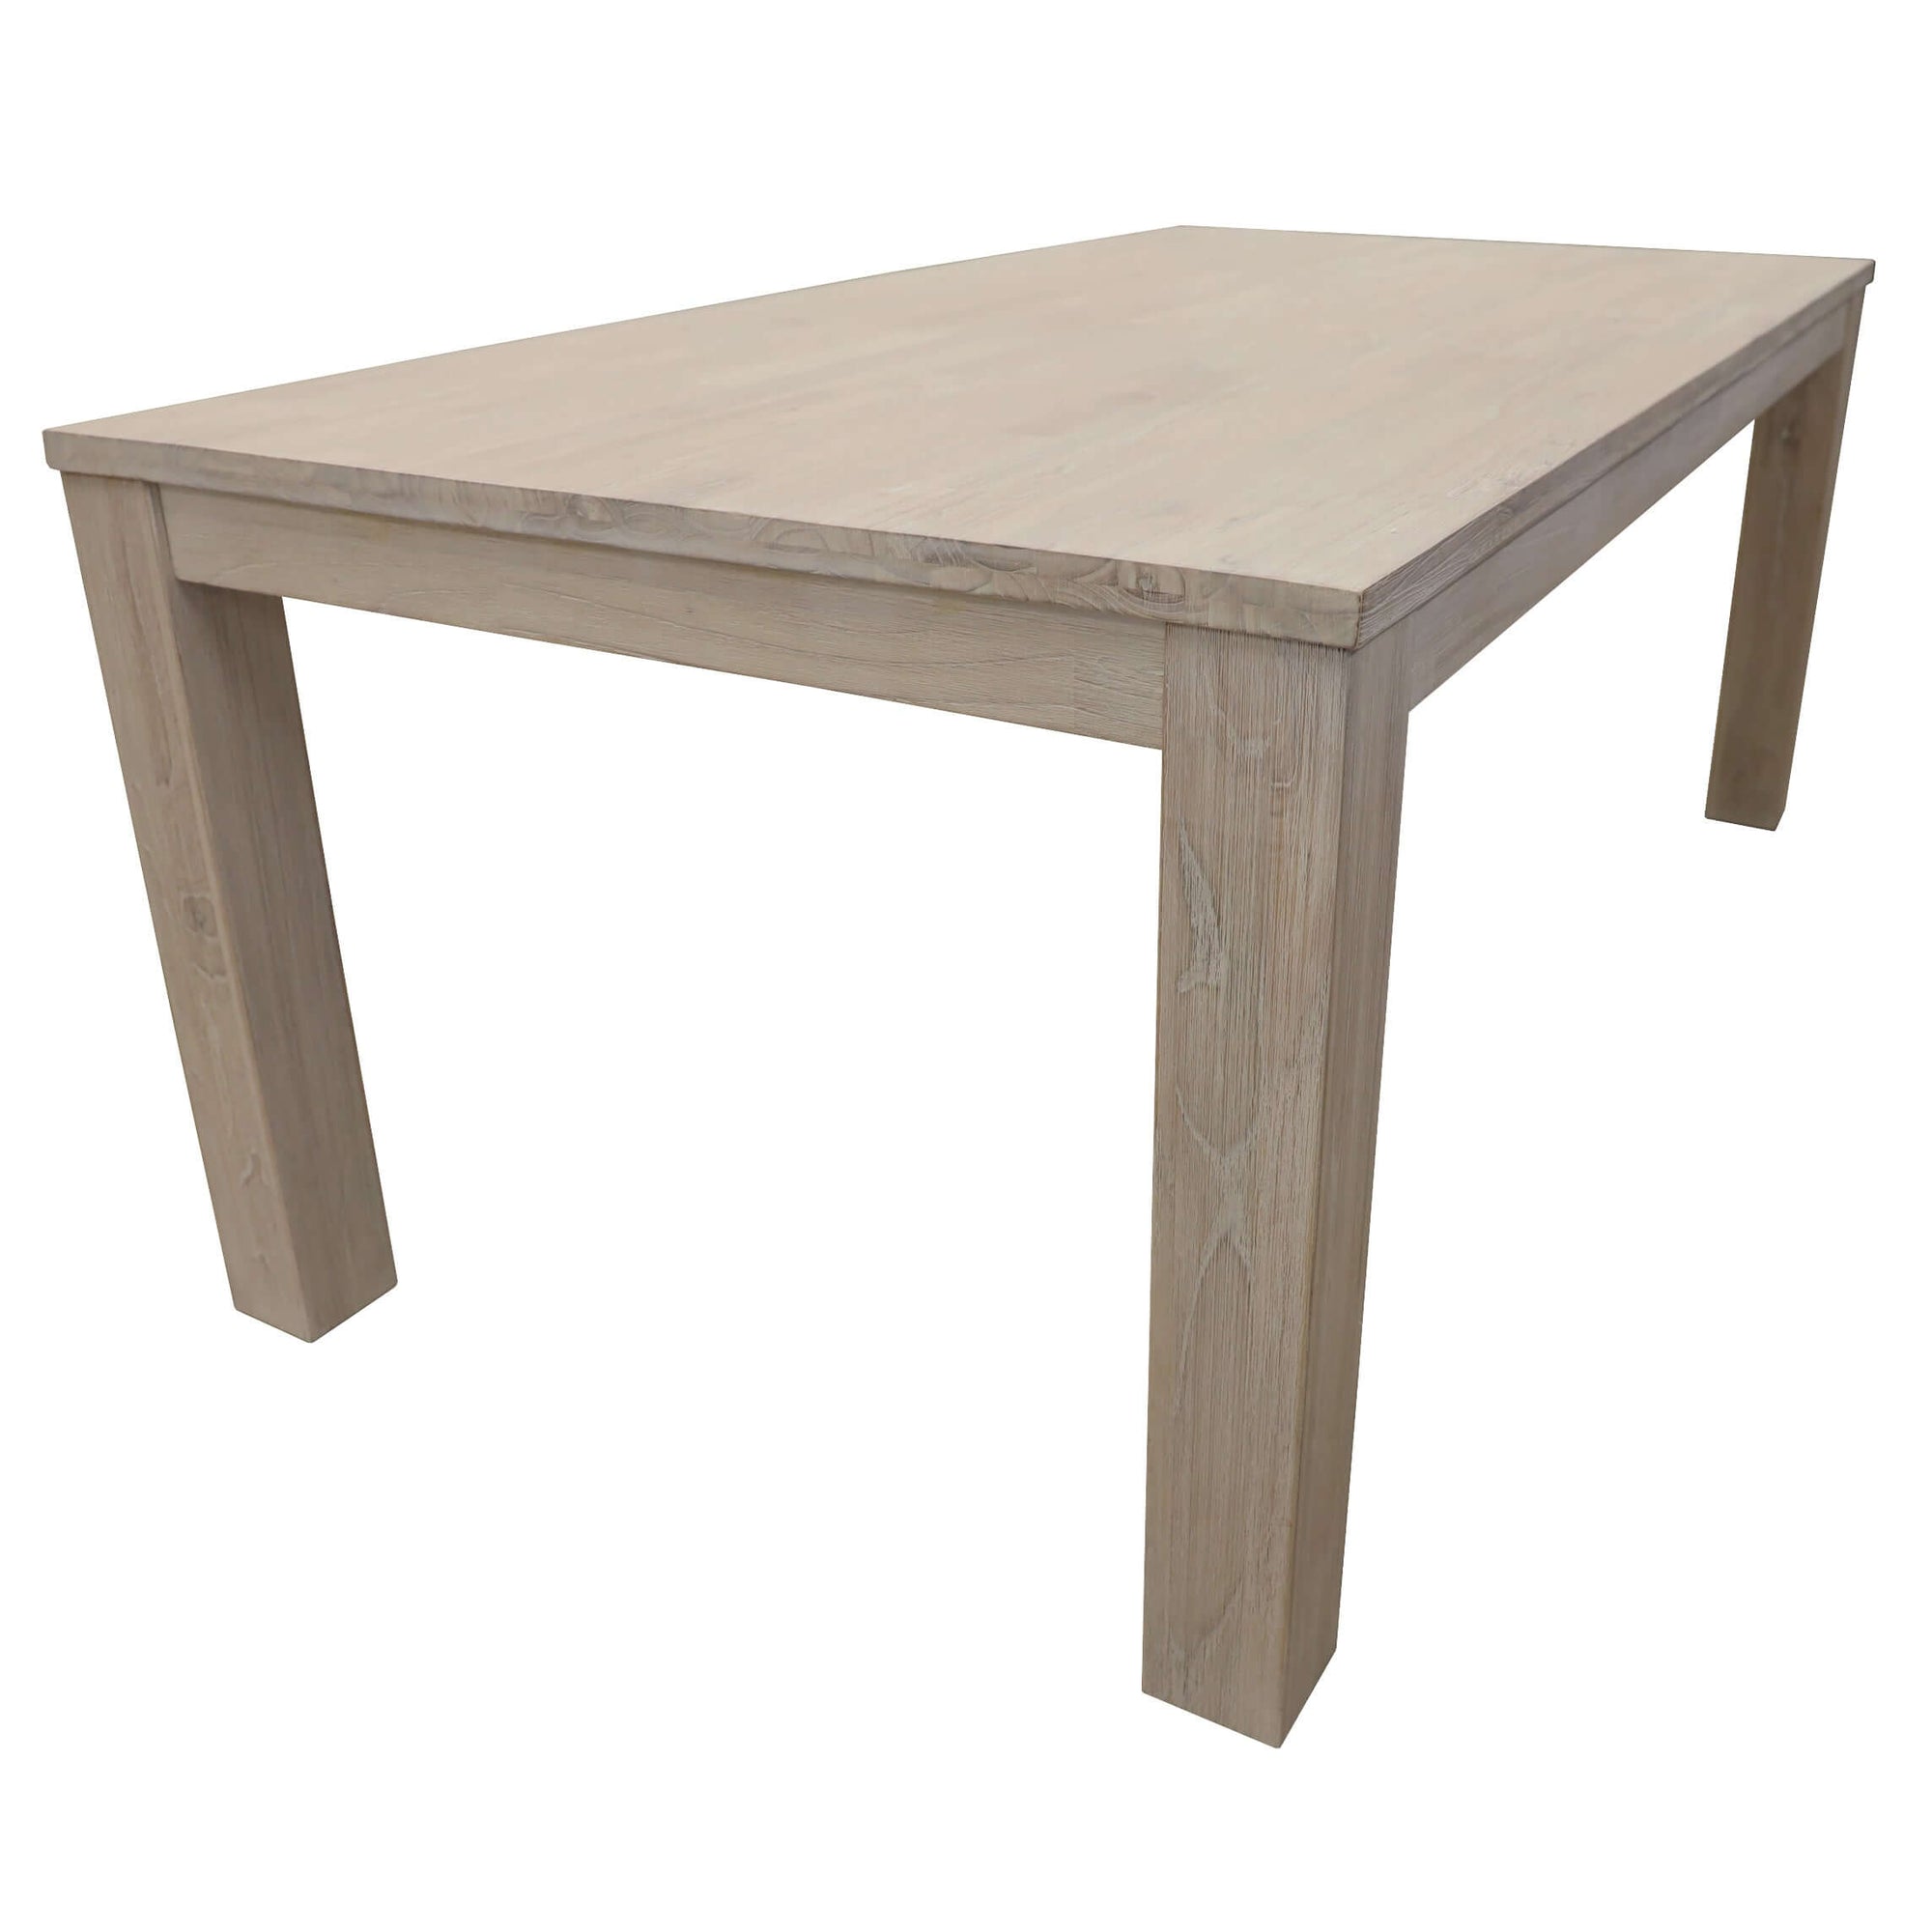 Foxglove Dining Table 150cm Solid Mt Ash Wood Home Dinner Furniture - White-Upinteriors